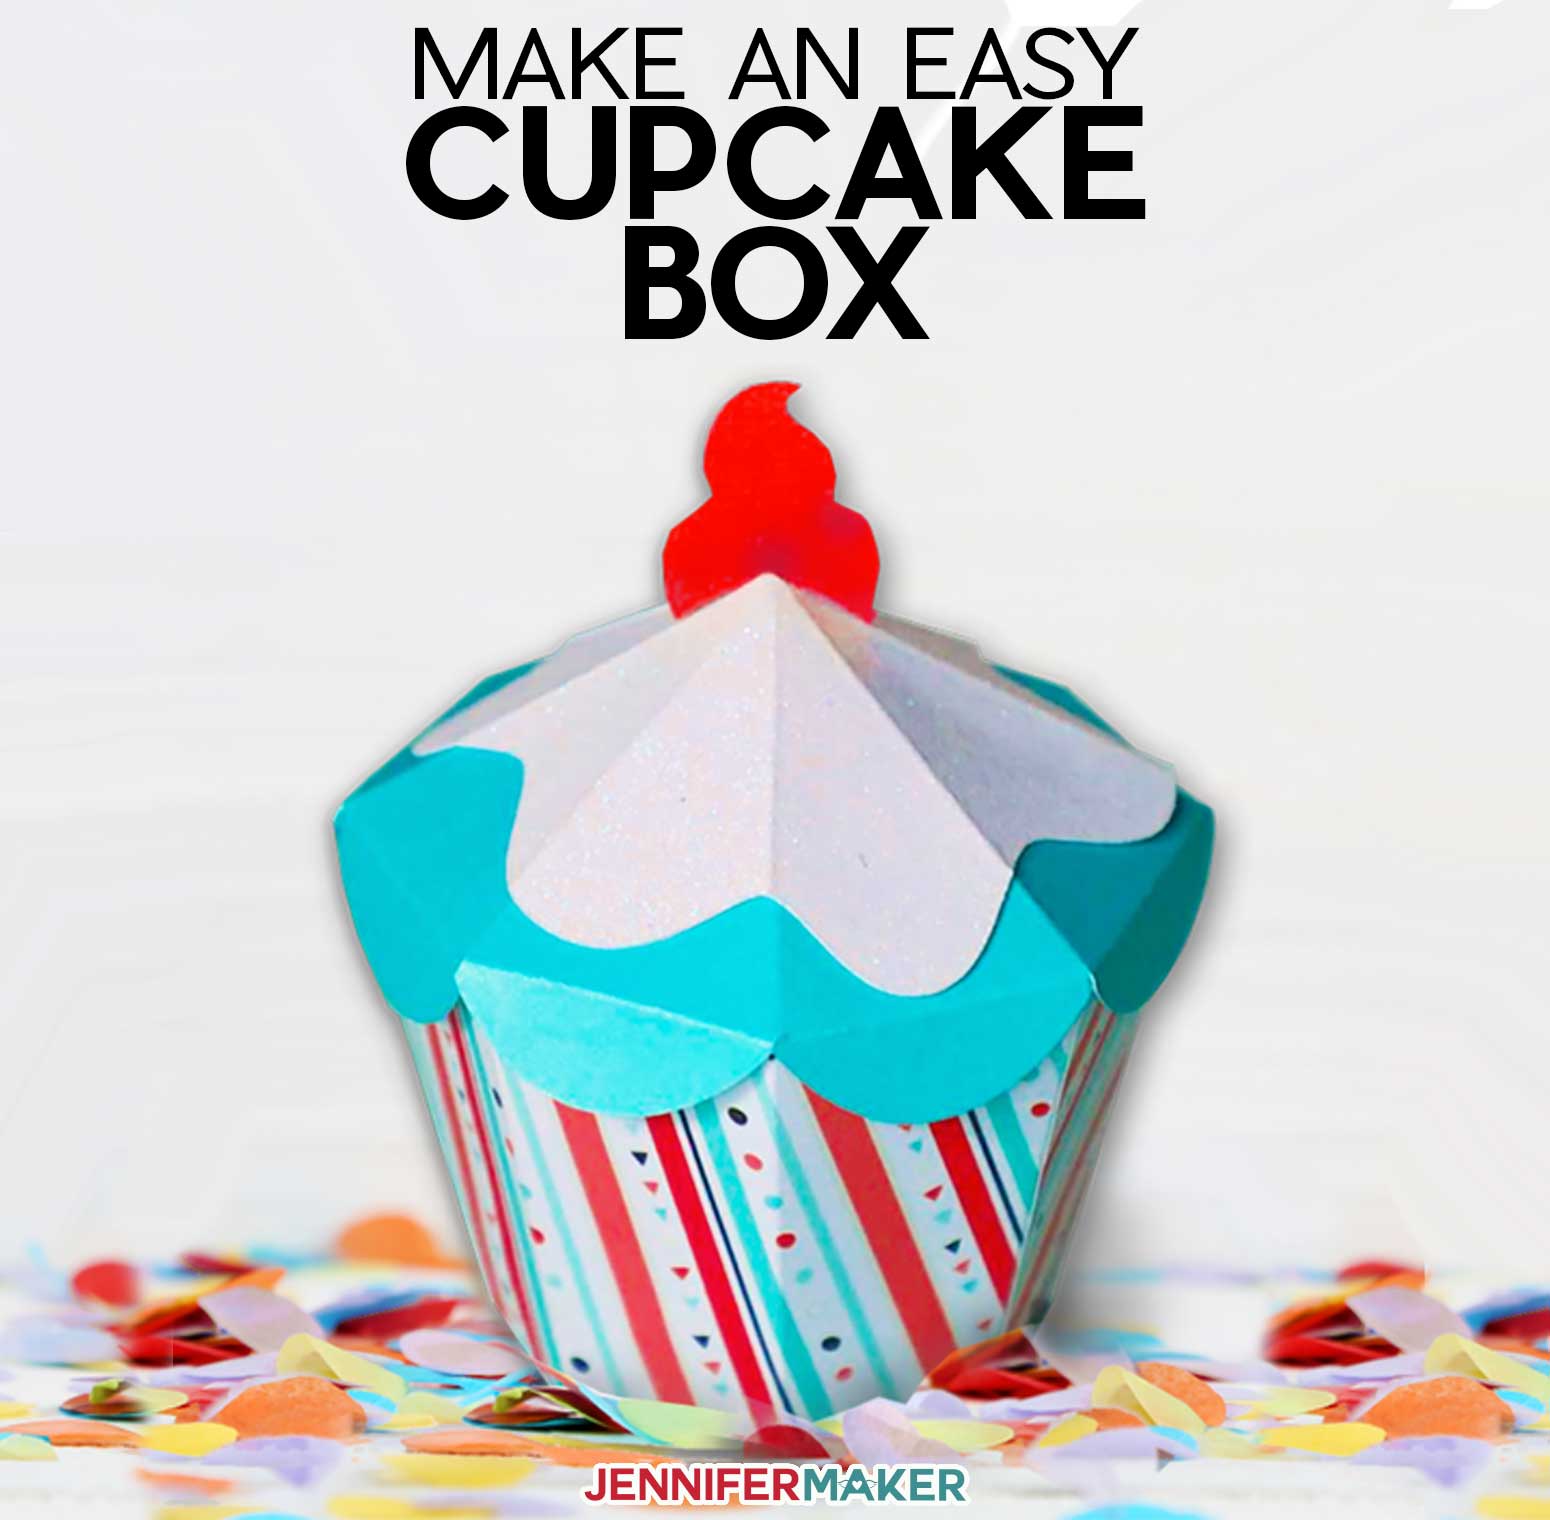 DIY Cupcake Gift Box for Parties, Gift Cards, and Cupcakes! - Free SVG Cut File and Printable Template